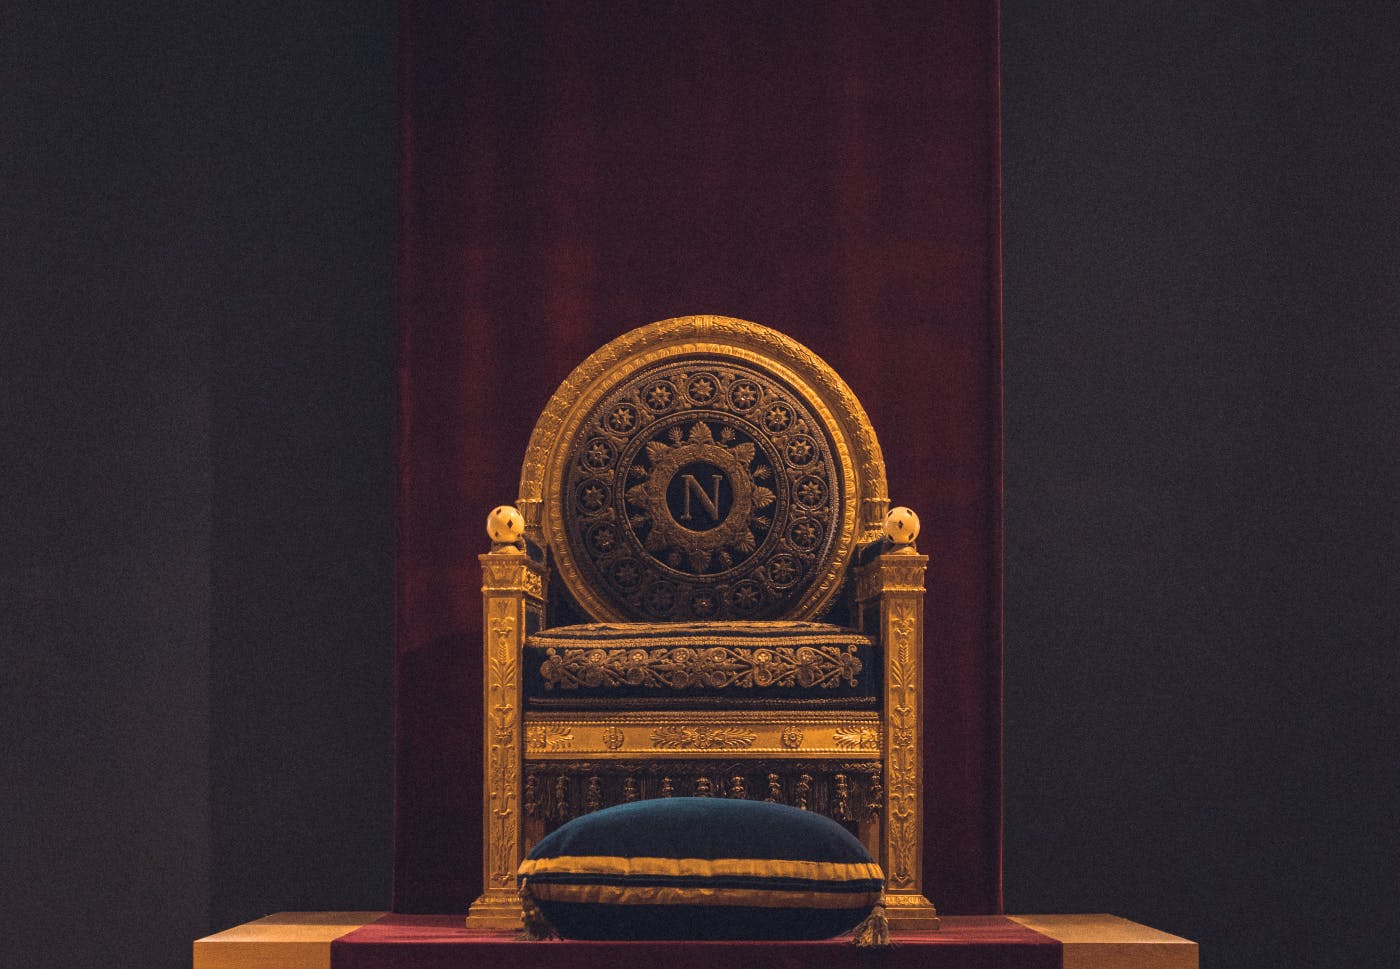 A gold throne with a blue foot pillow